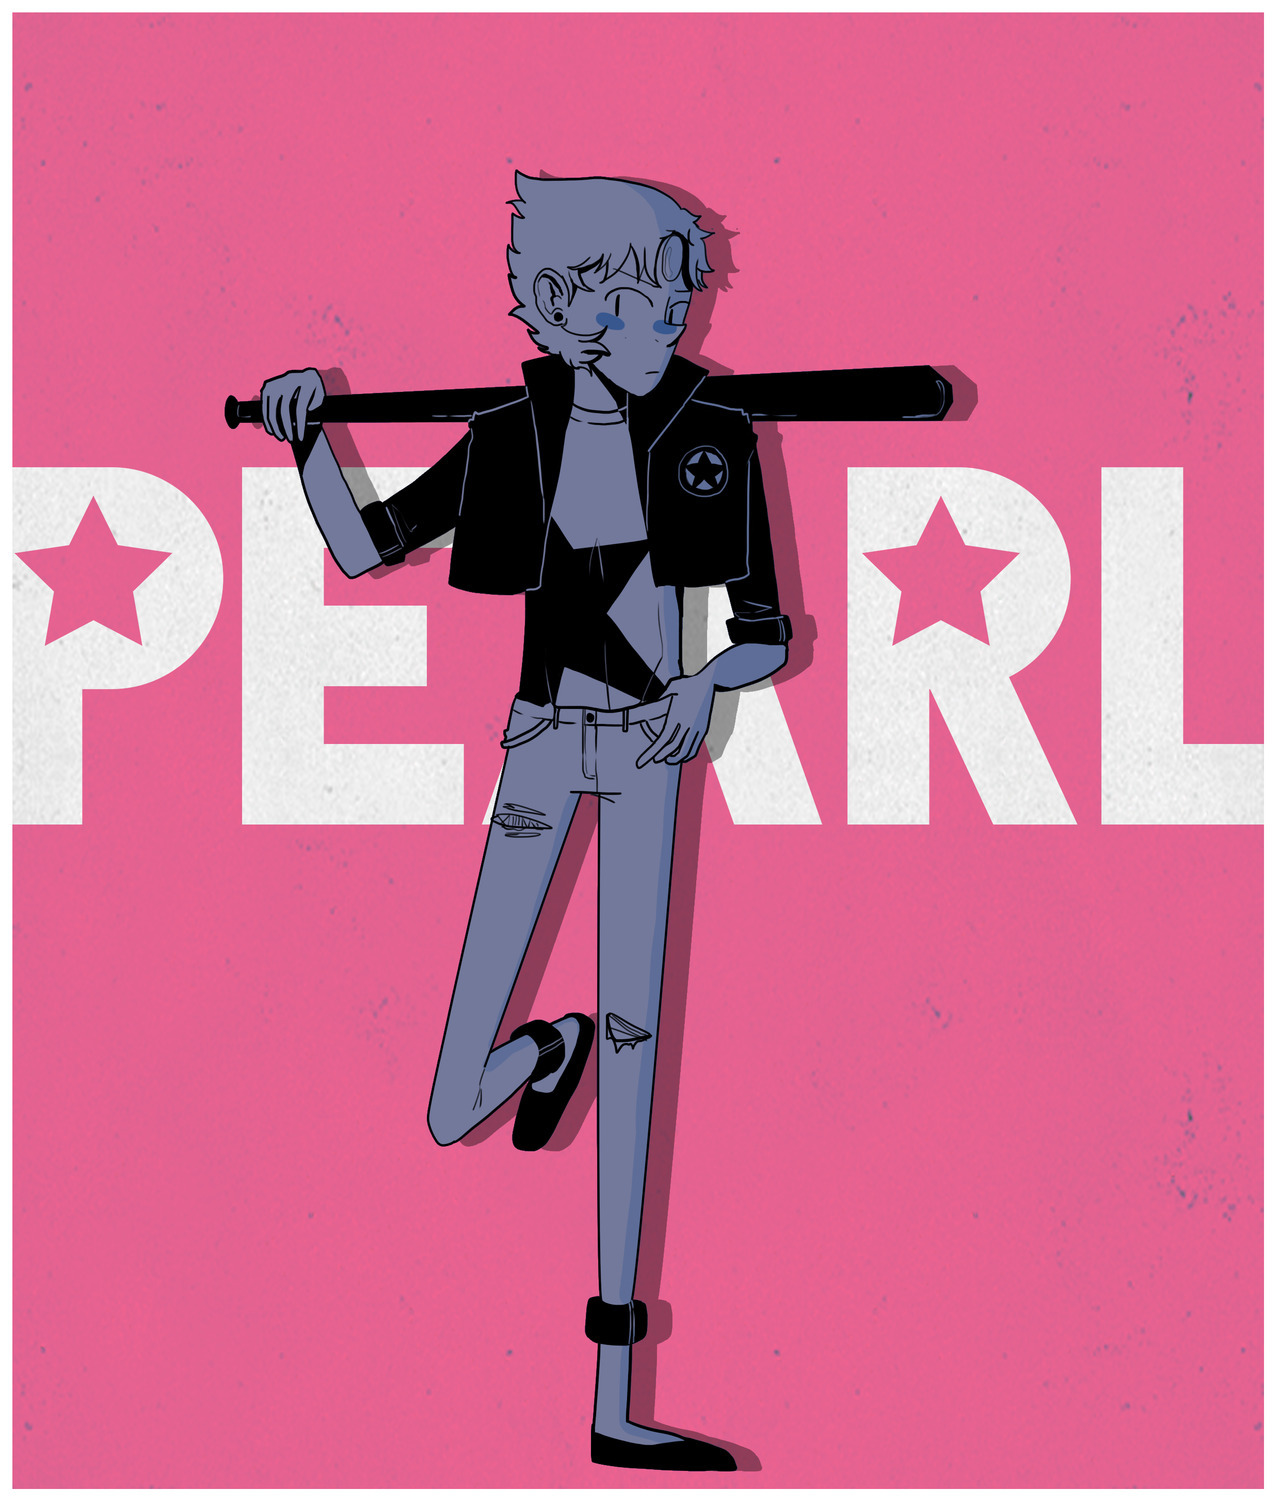 Bad Pearl is the only thing that I like